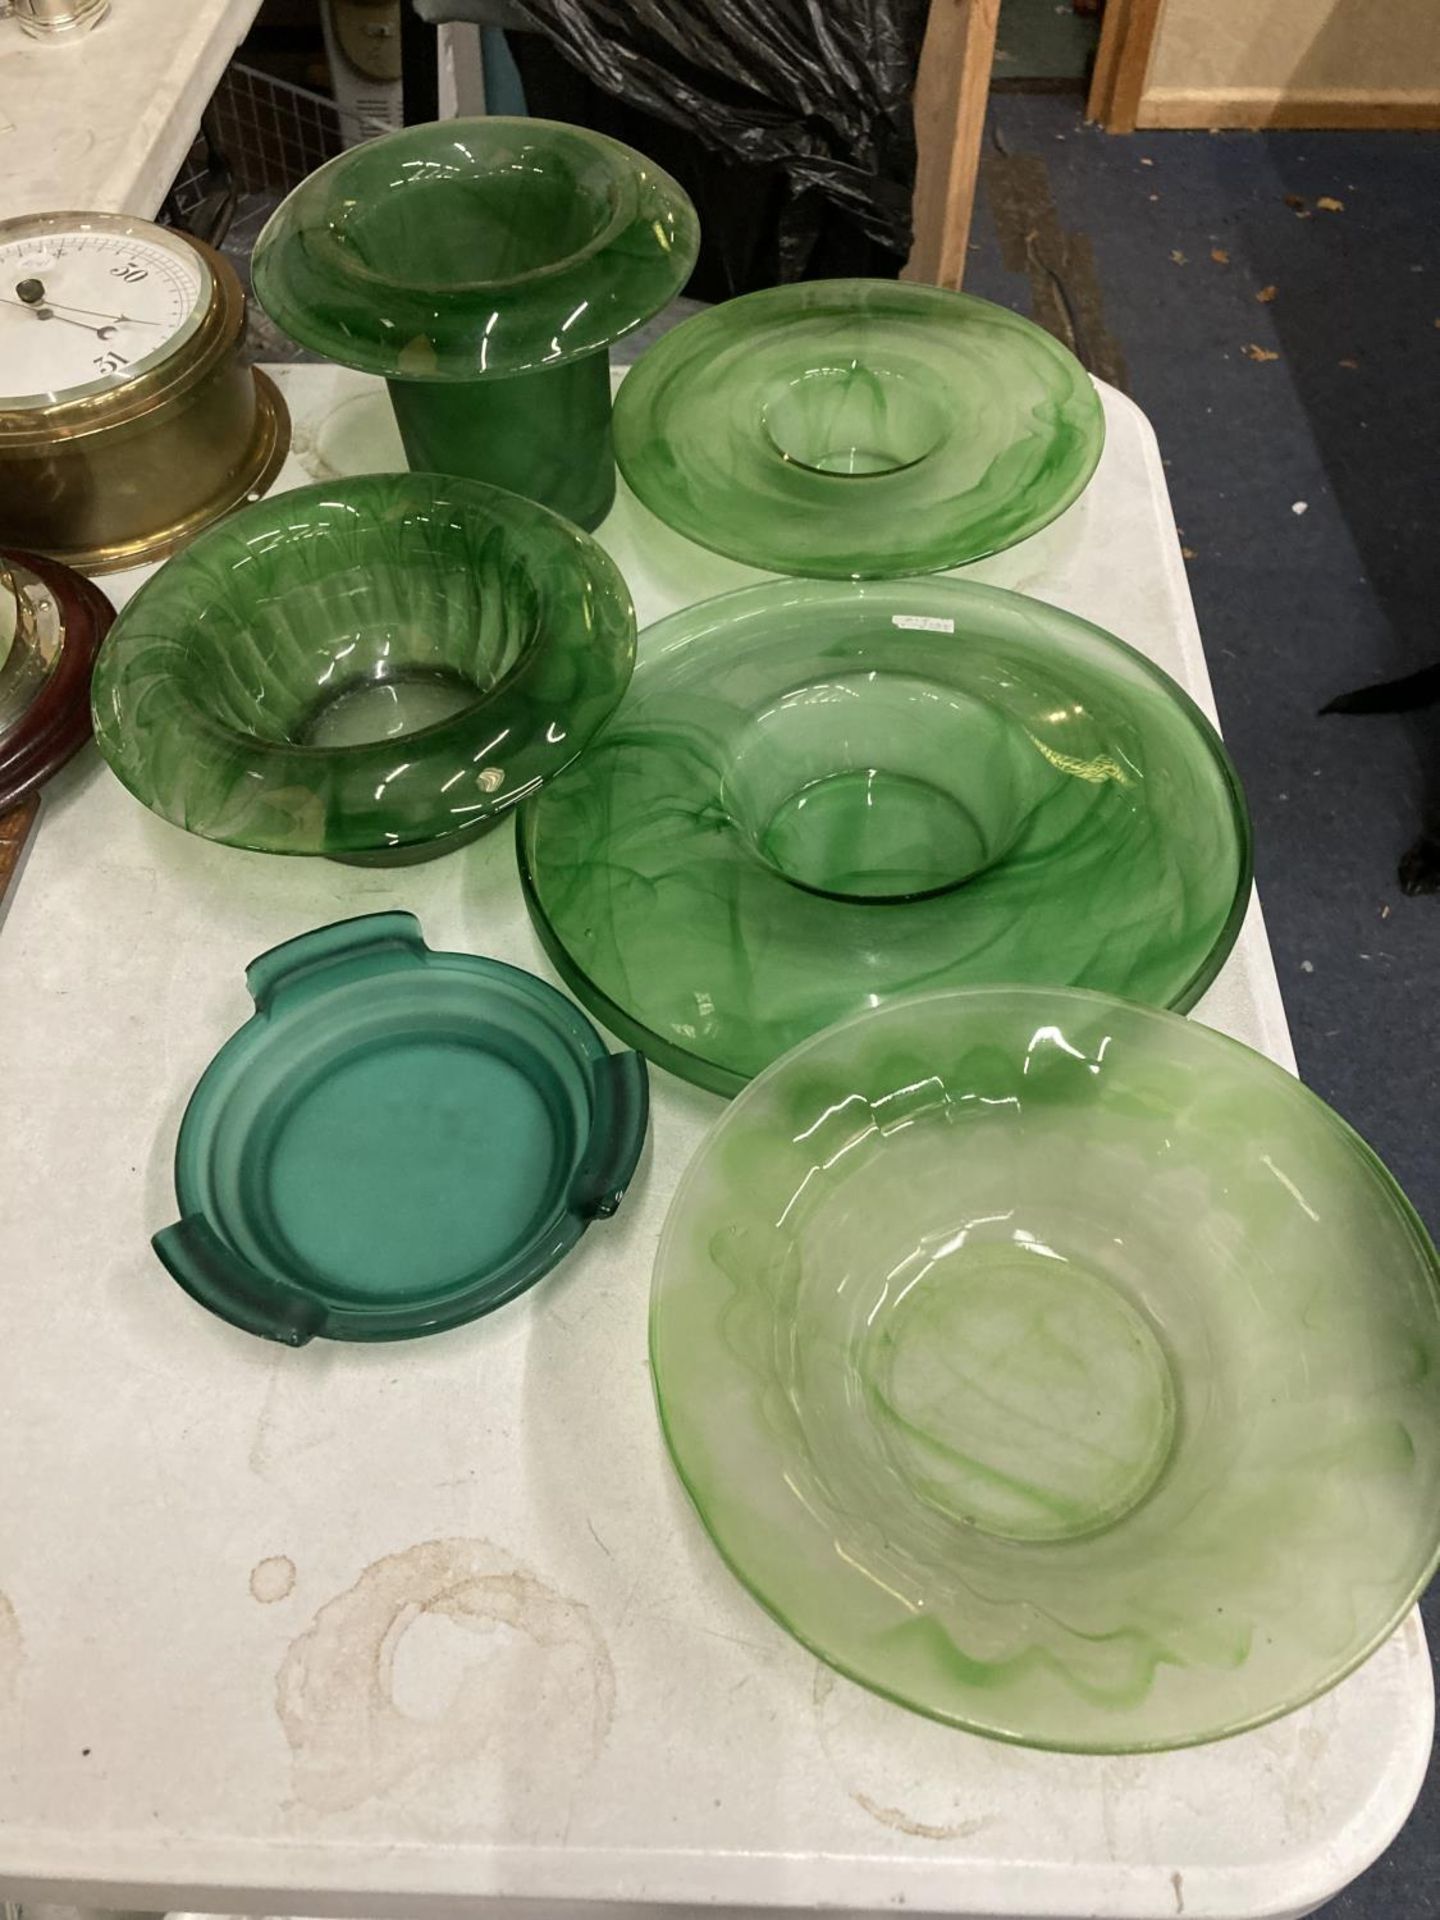 A QAUNTITY OF GREEN CLOUD GLASSWARE BOWLS - 6 IN TOTAL